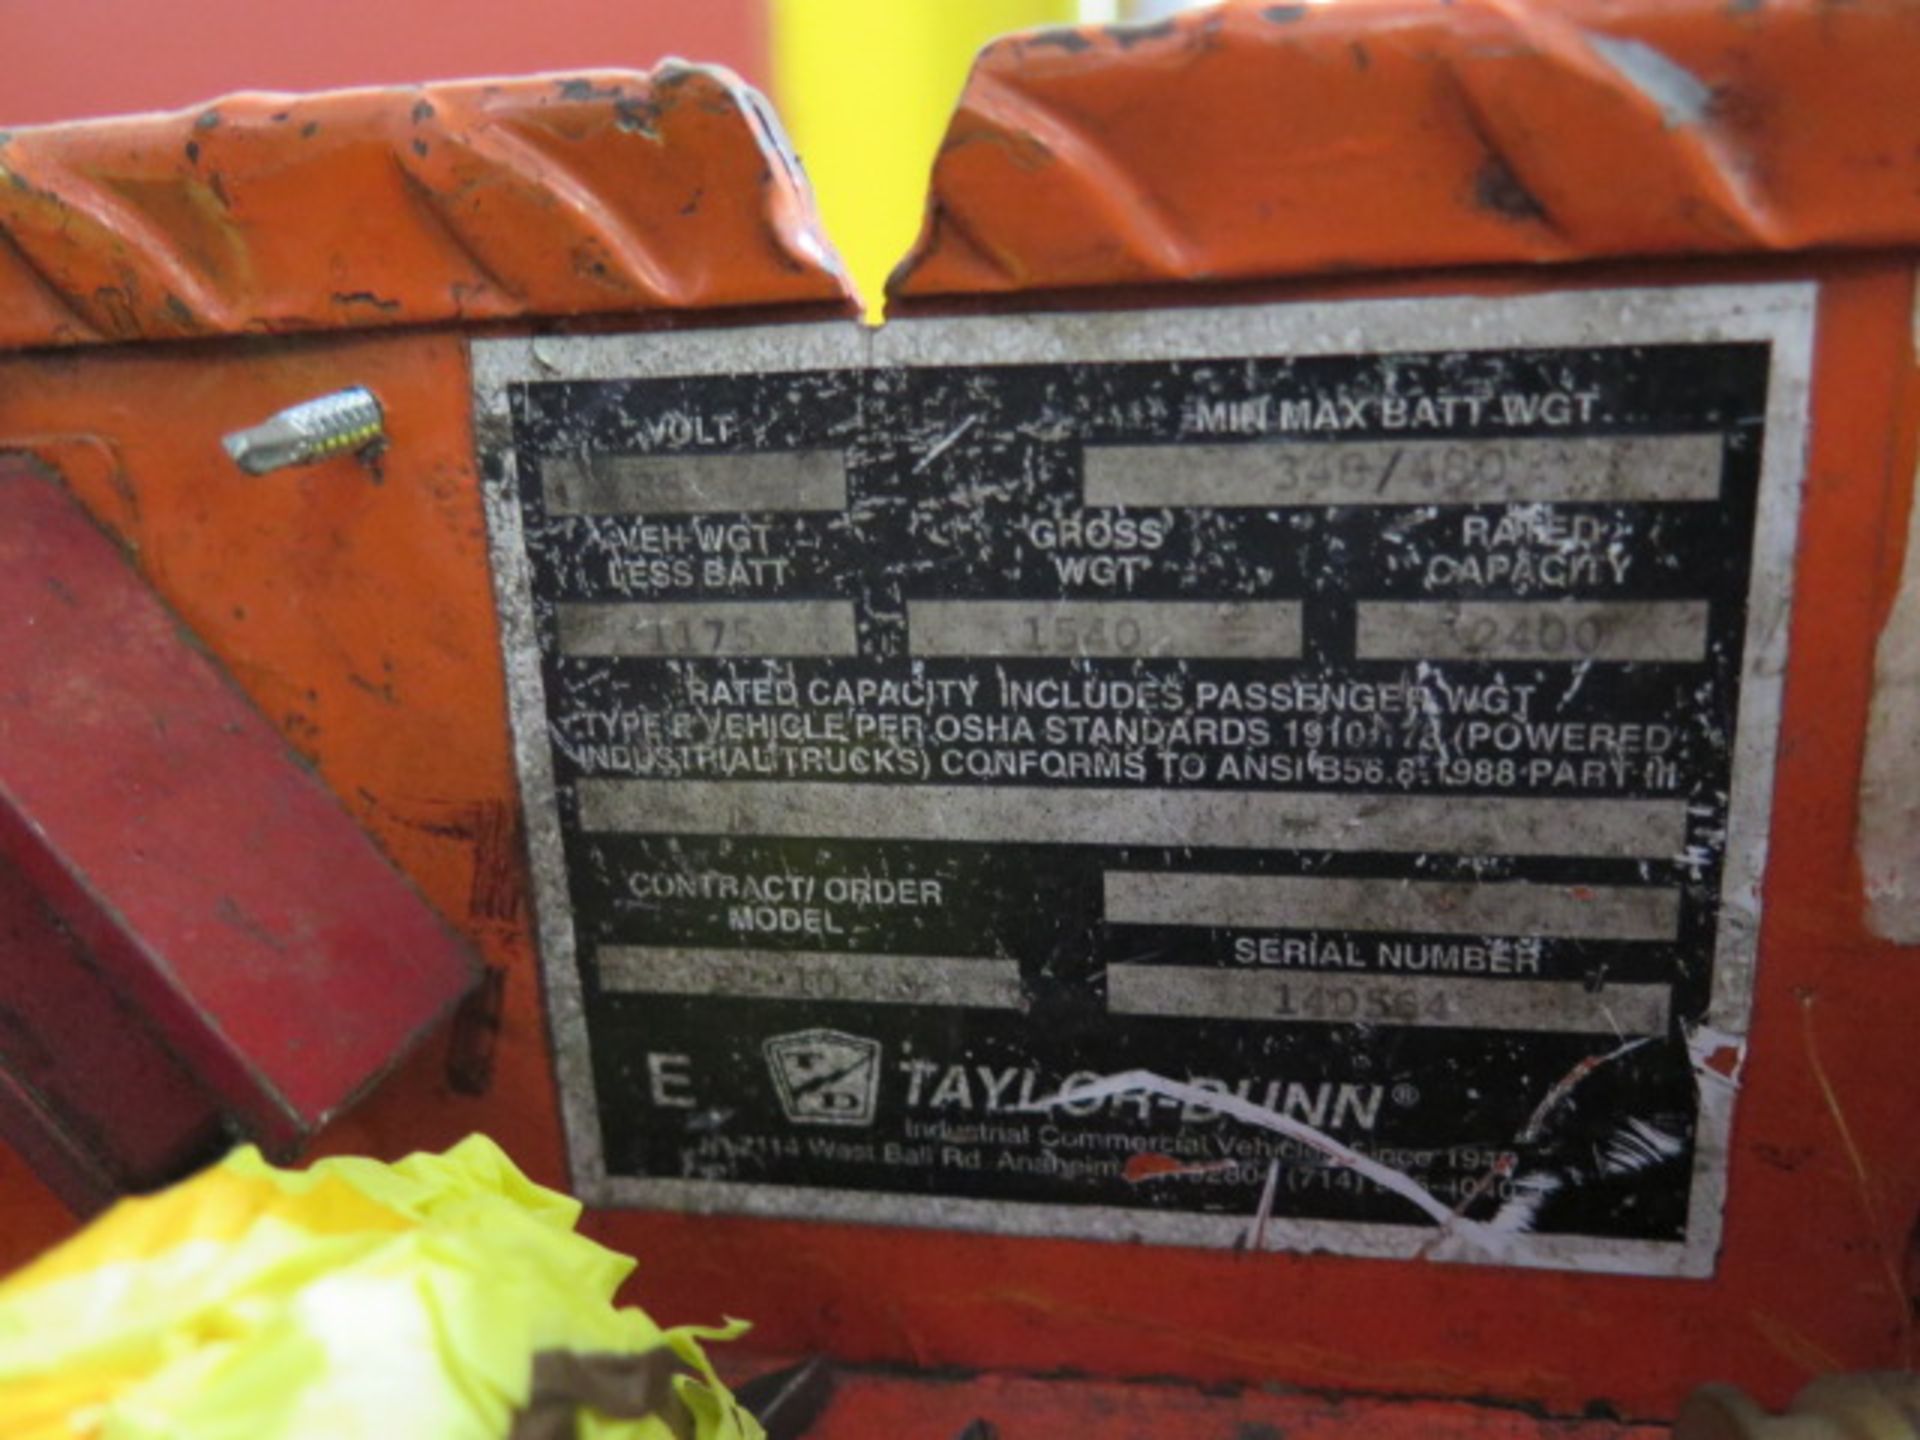 Taylor-Dunn Electric Service Vehicle (SOLD AS-IS - NO WARRANTY) - Image 8 of 8